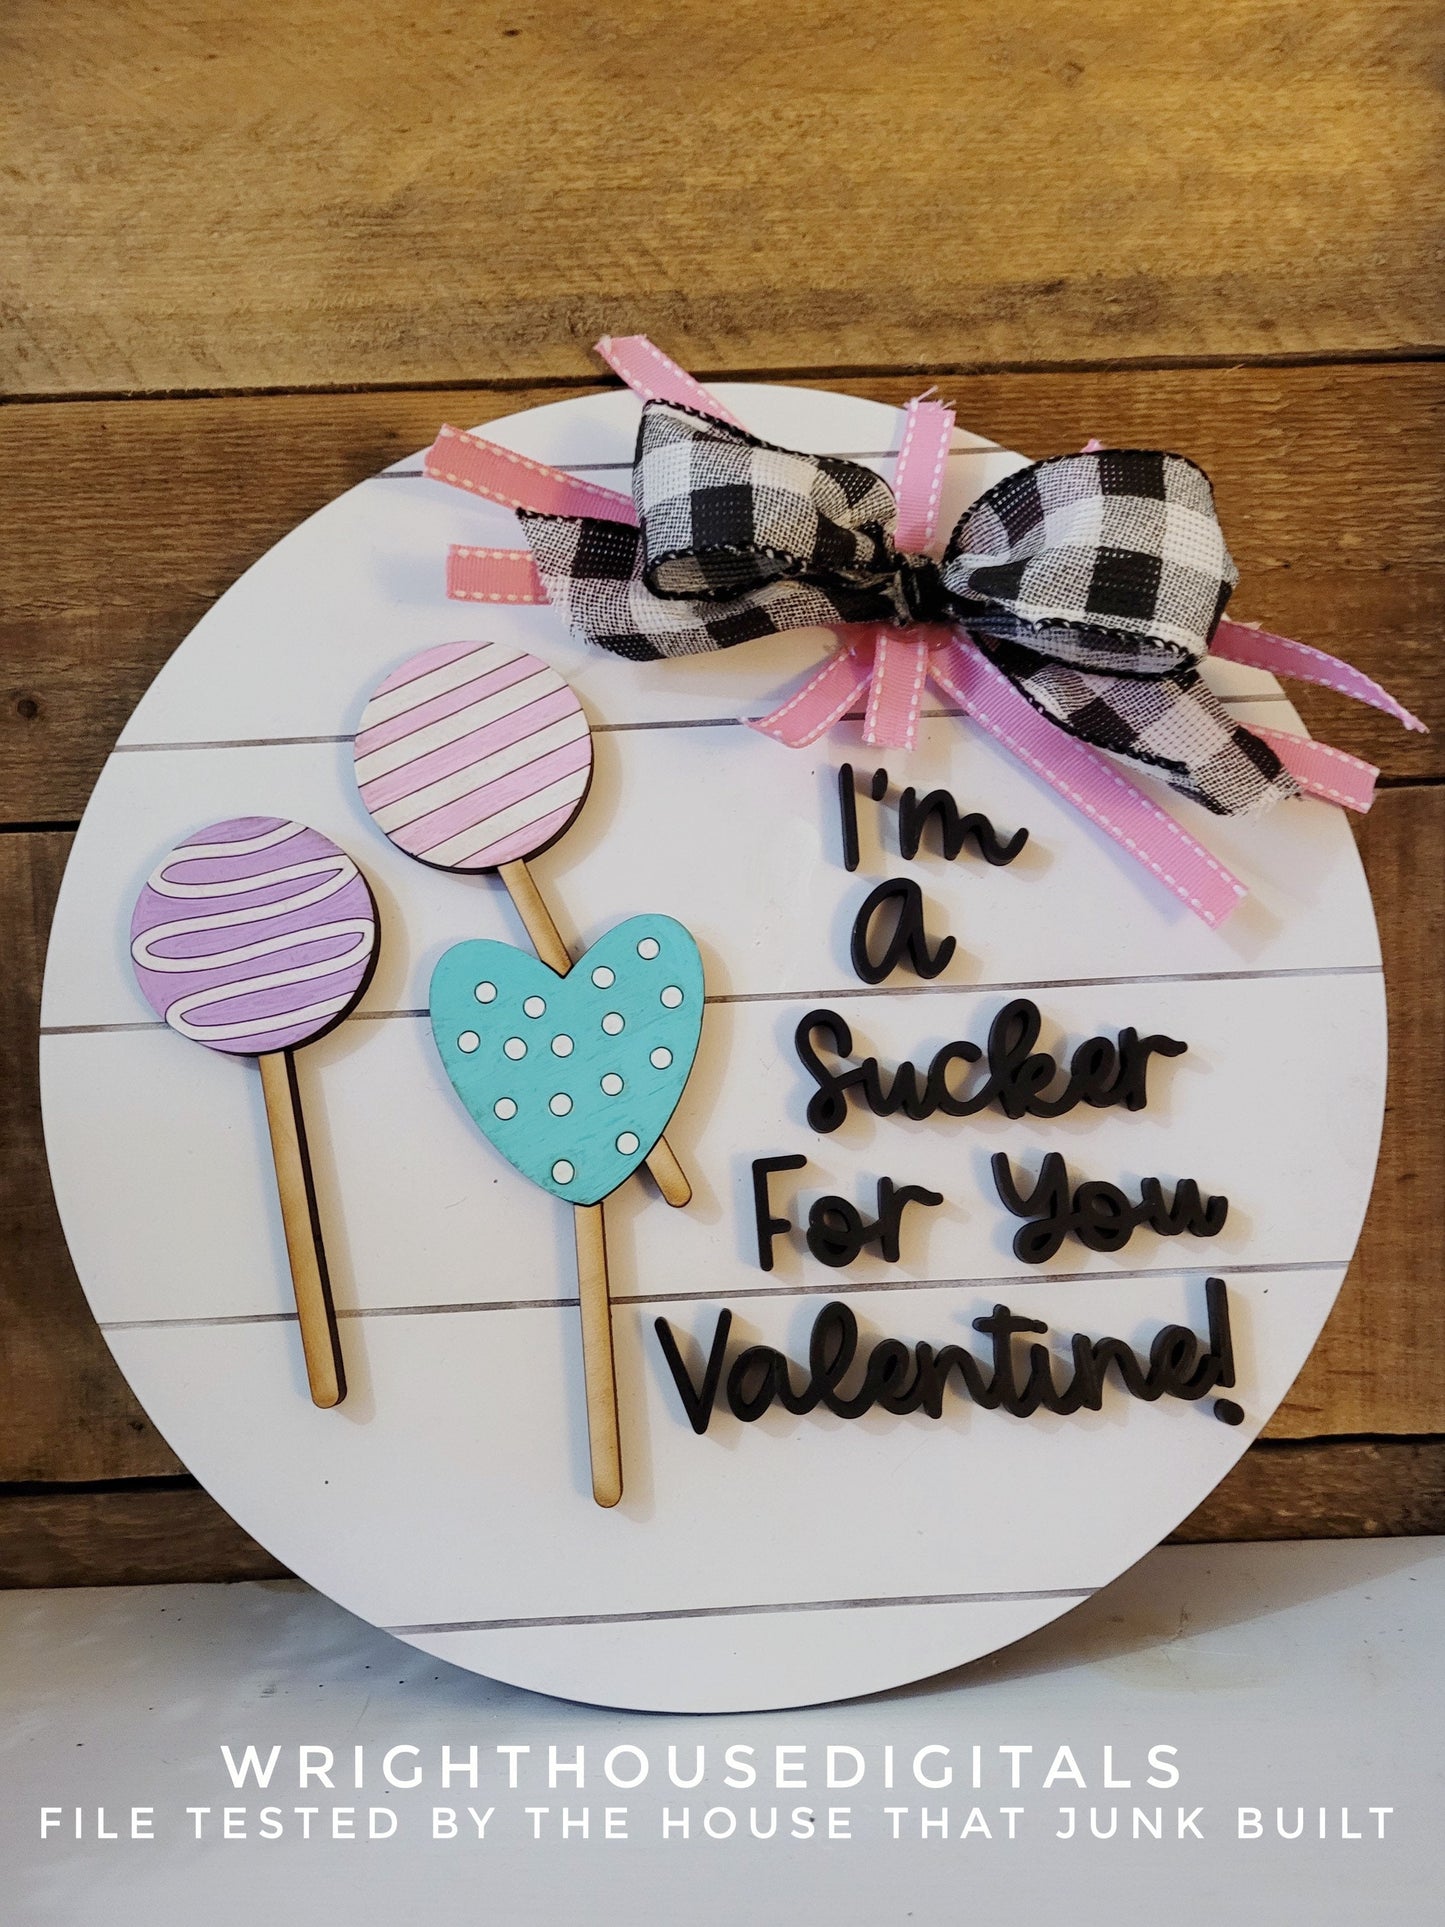 Valentine' Day Cakepop - I’m A Sucker For You - Festive Seasonal Round - Files for Sign Making - SVG Cut File For Glowforge - Digital File